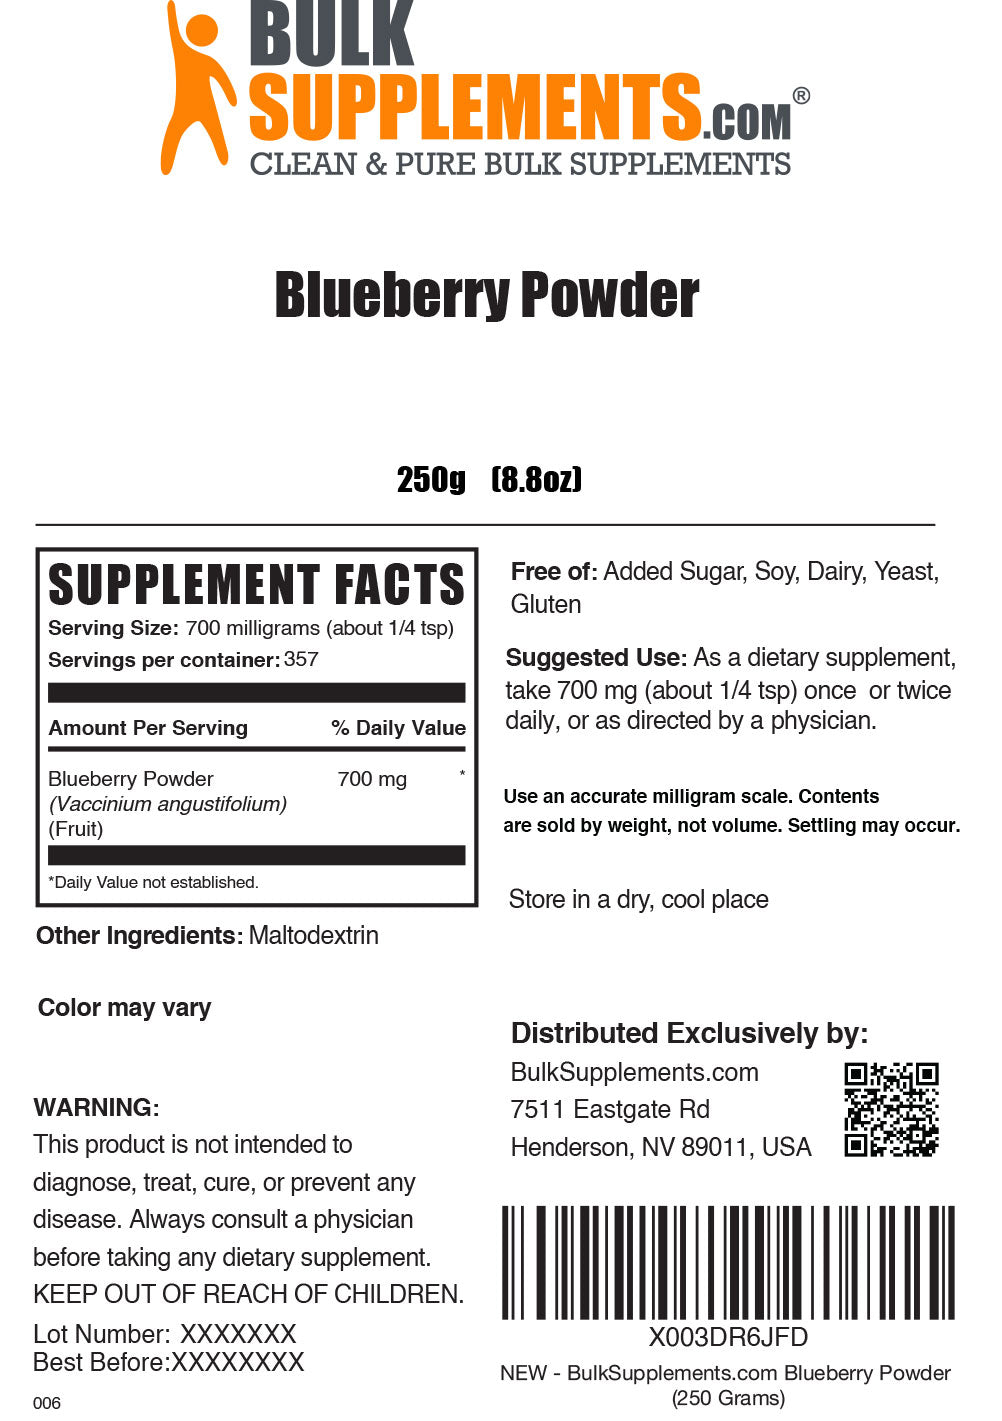 250g of Blueberry Powder Supplement Facts